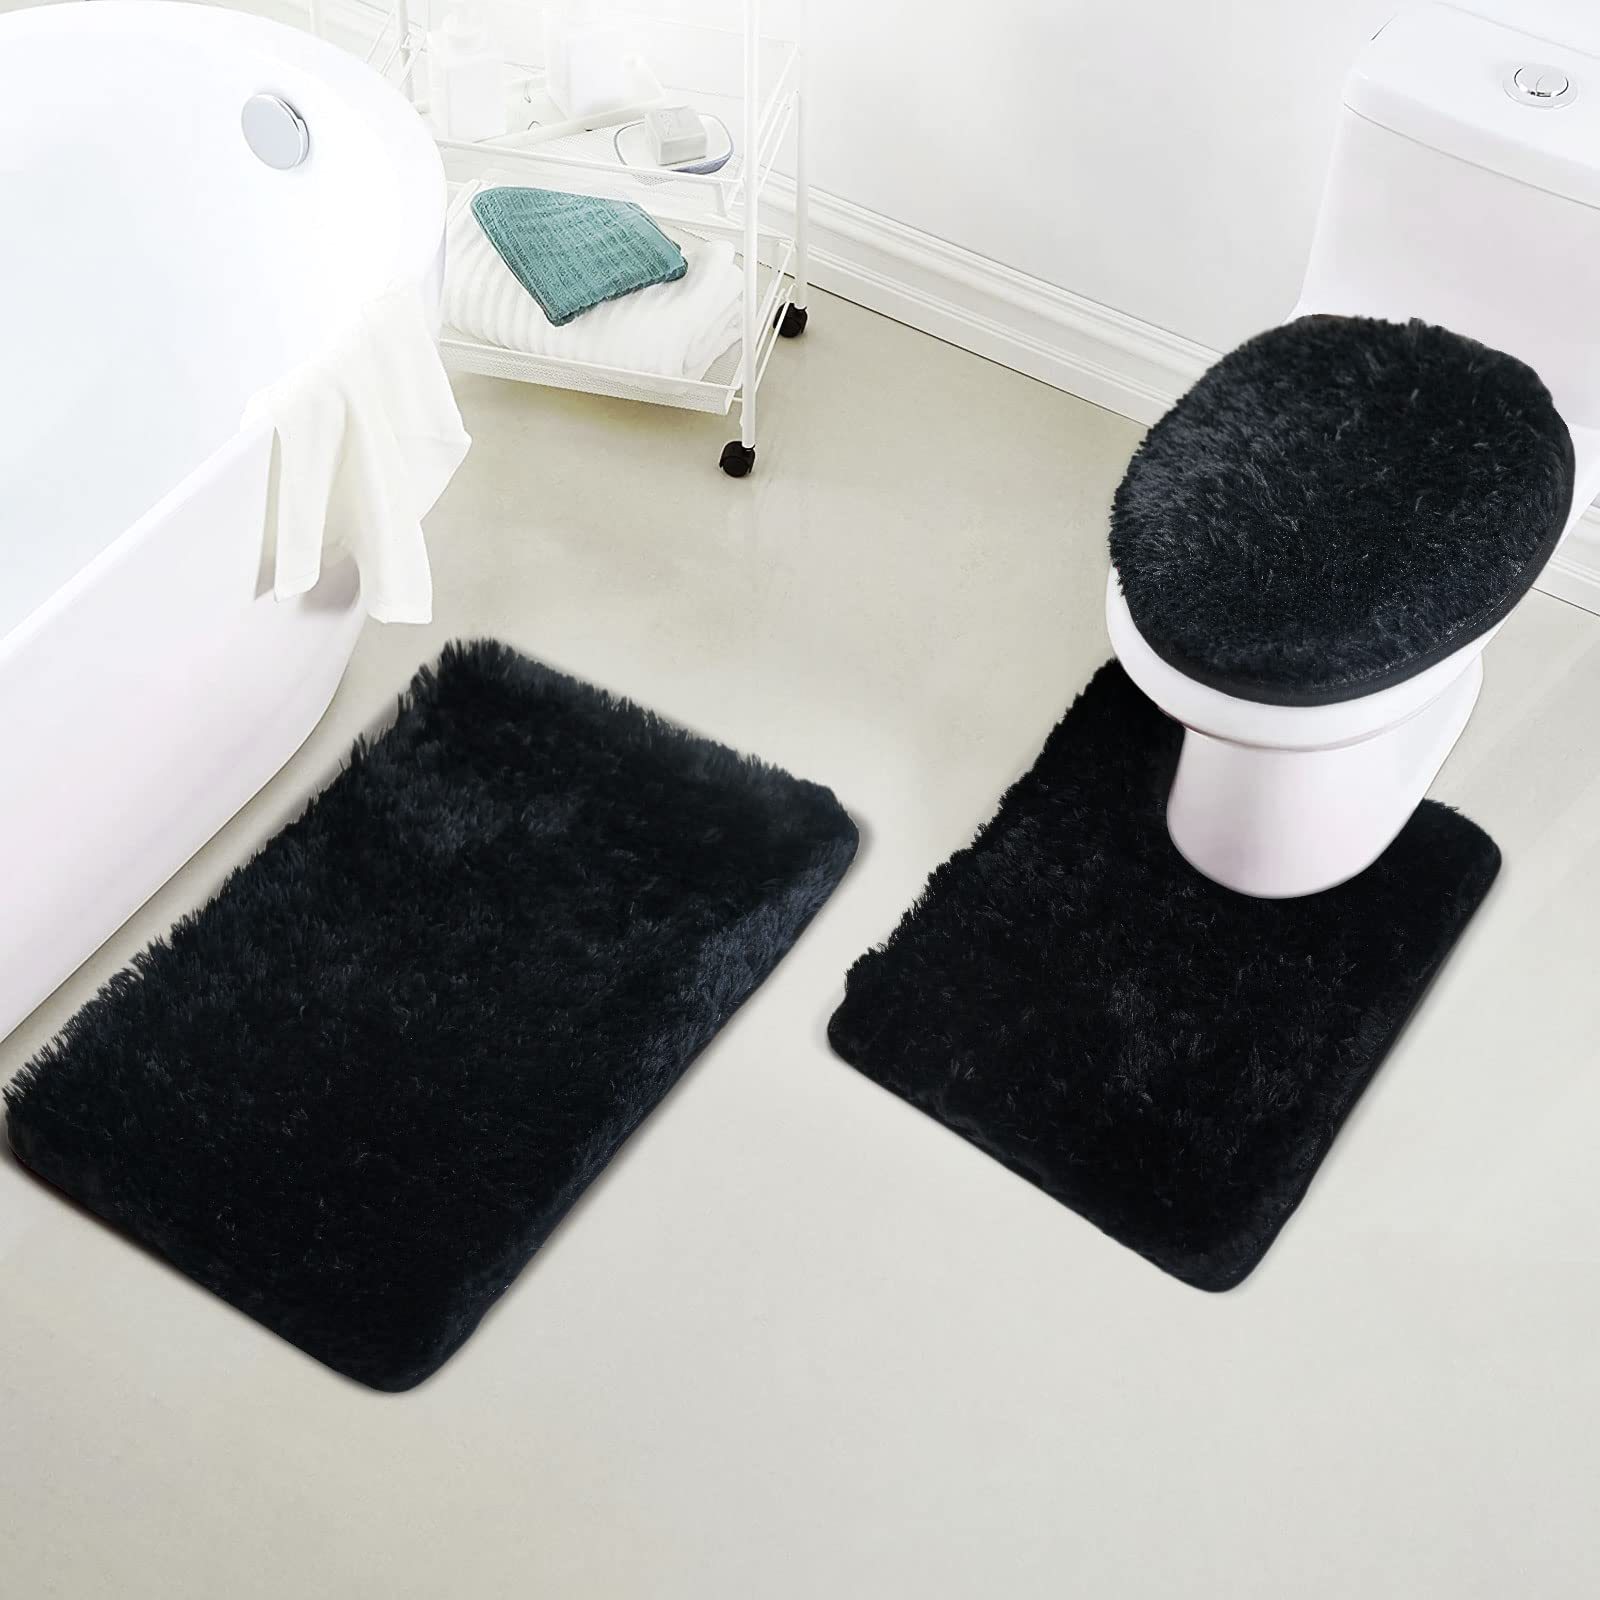 Montgomery 3 Piece Water Absorbent Bath Rug Contour Rug Lid Cover